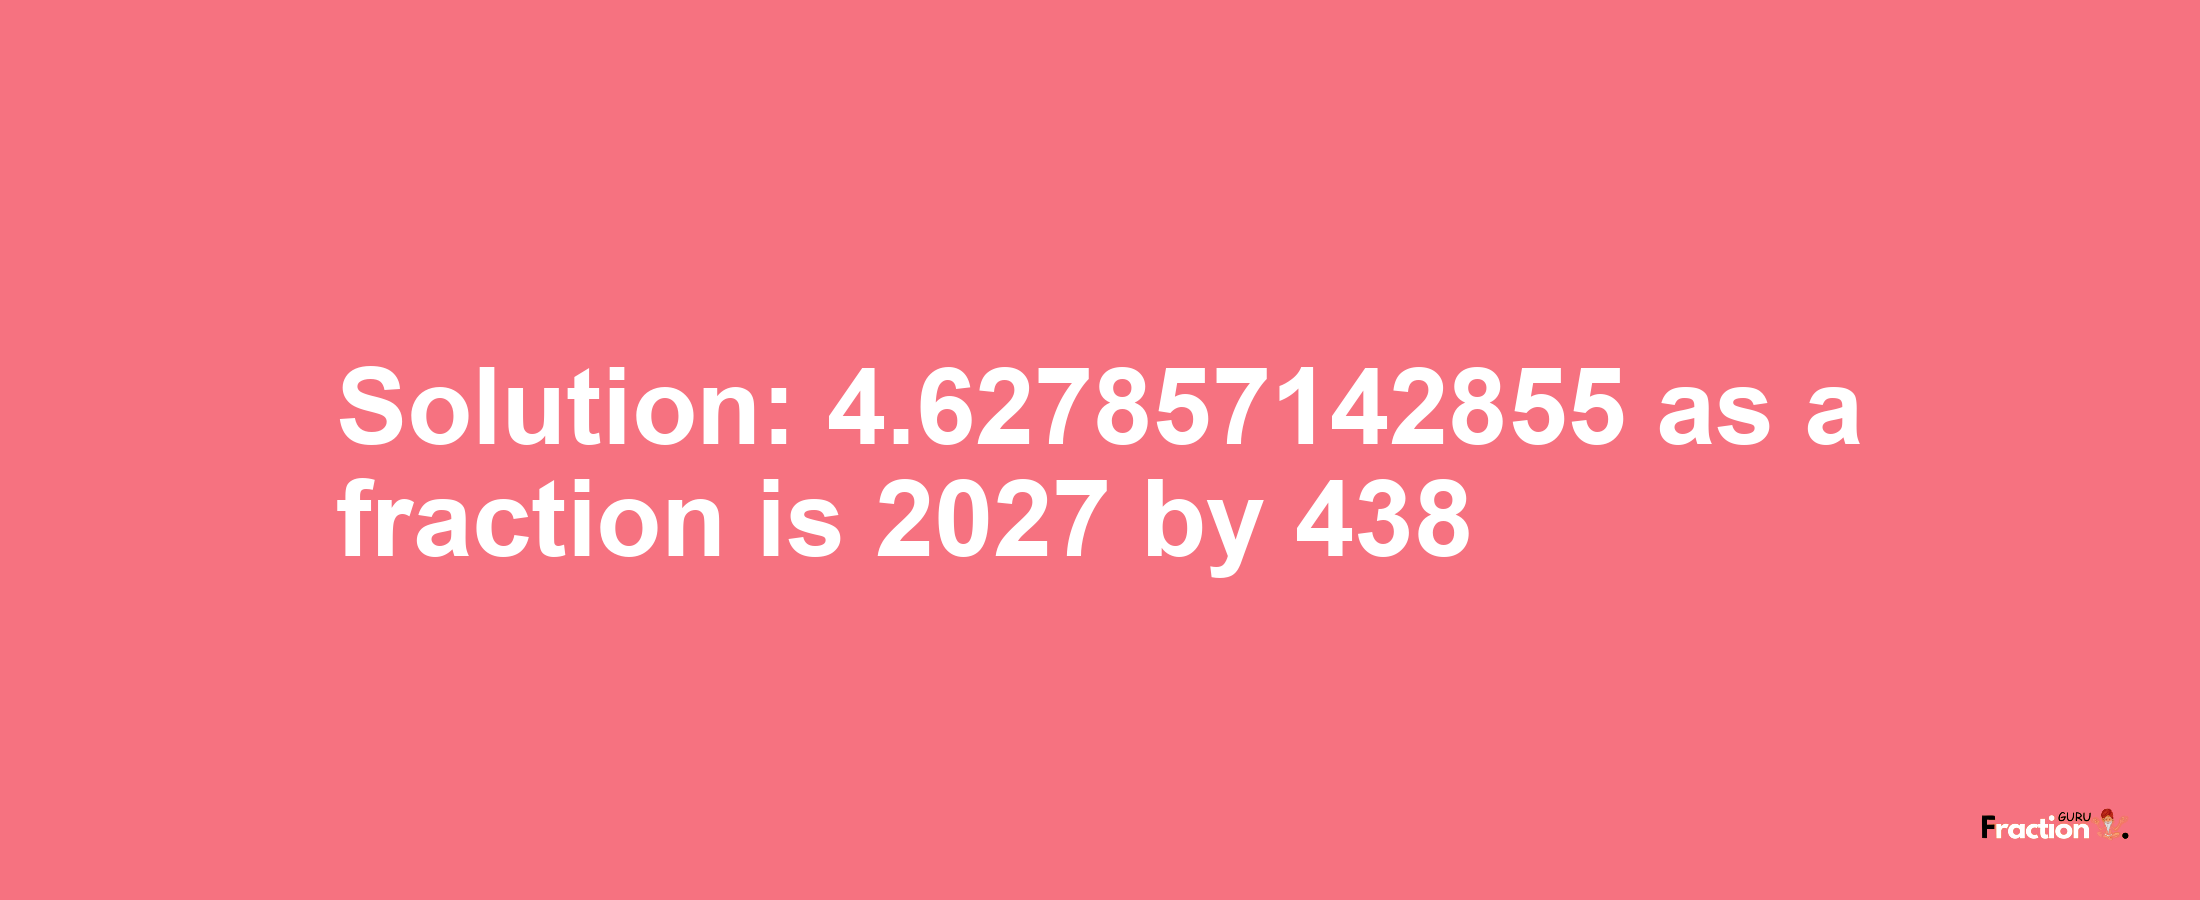 Solution:4.627857142855 as a fraction is 2027/438